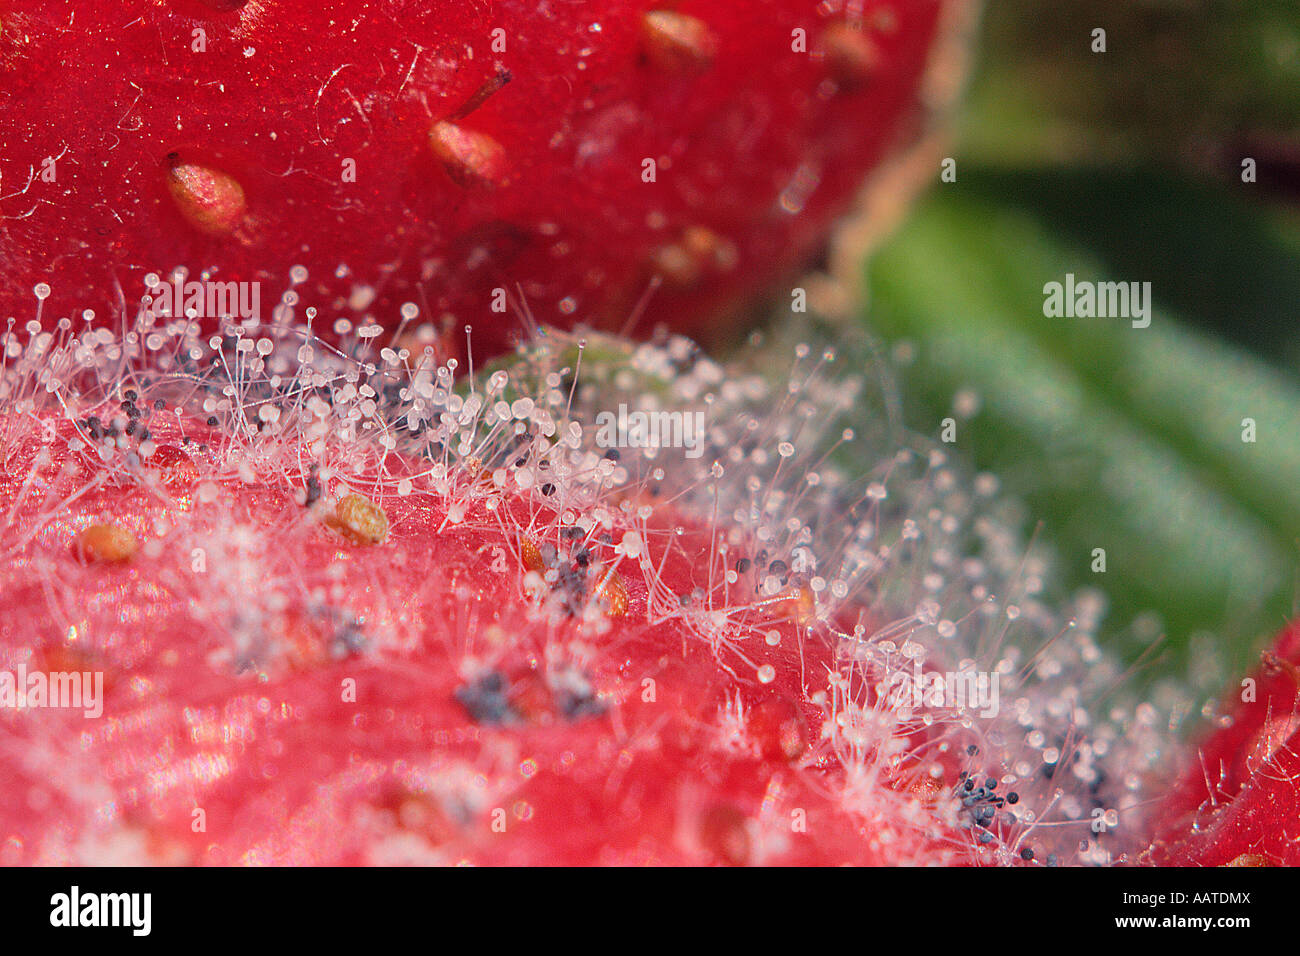 Mold, Order Mucorales. On strawberries Stock Photo